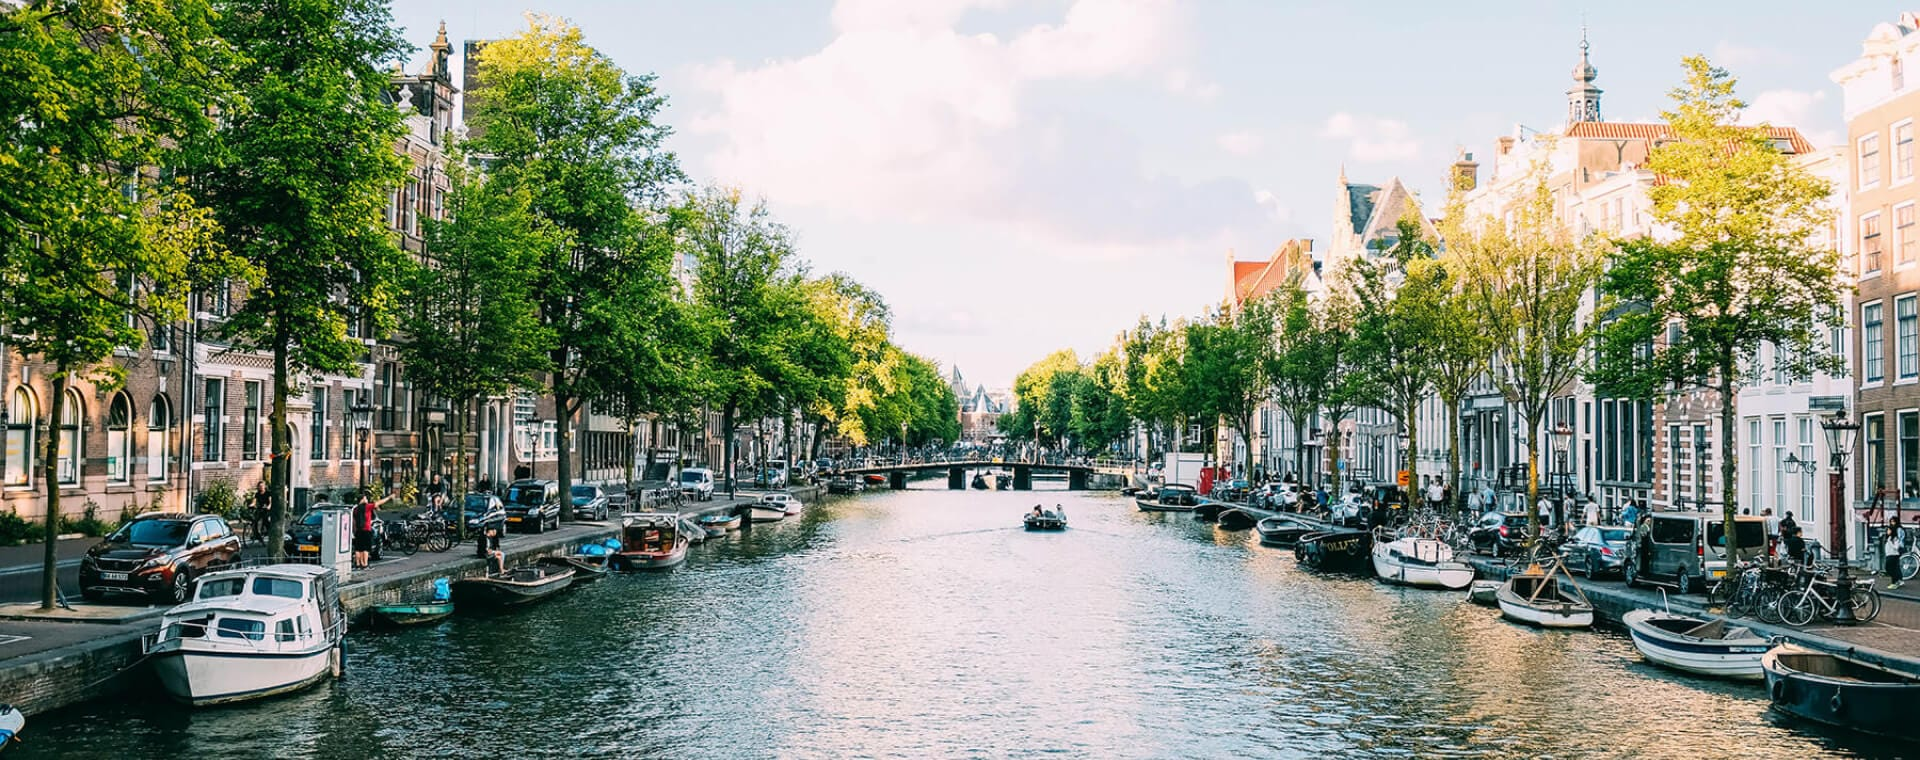 A canal lined with boats and trees in amsterdam.